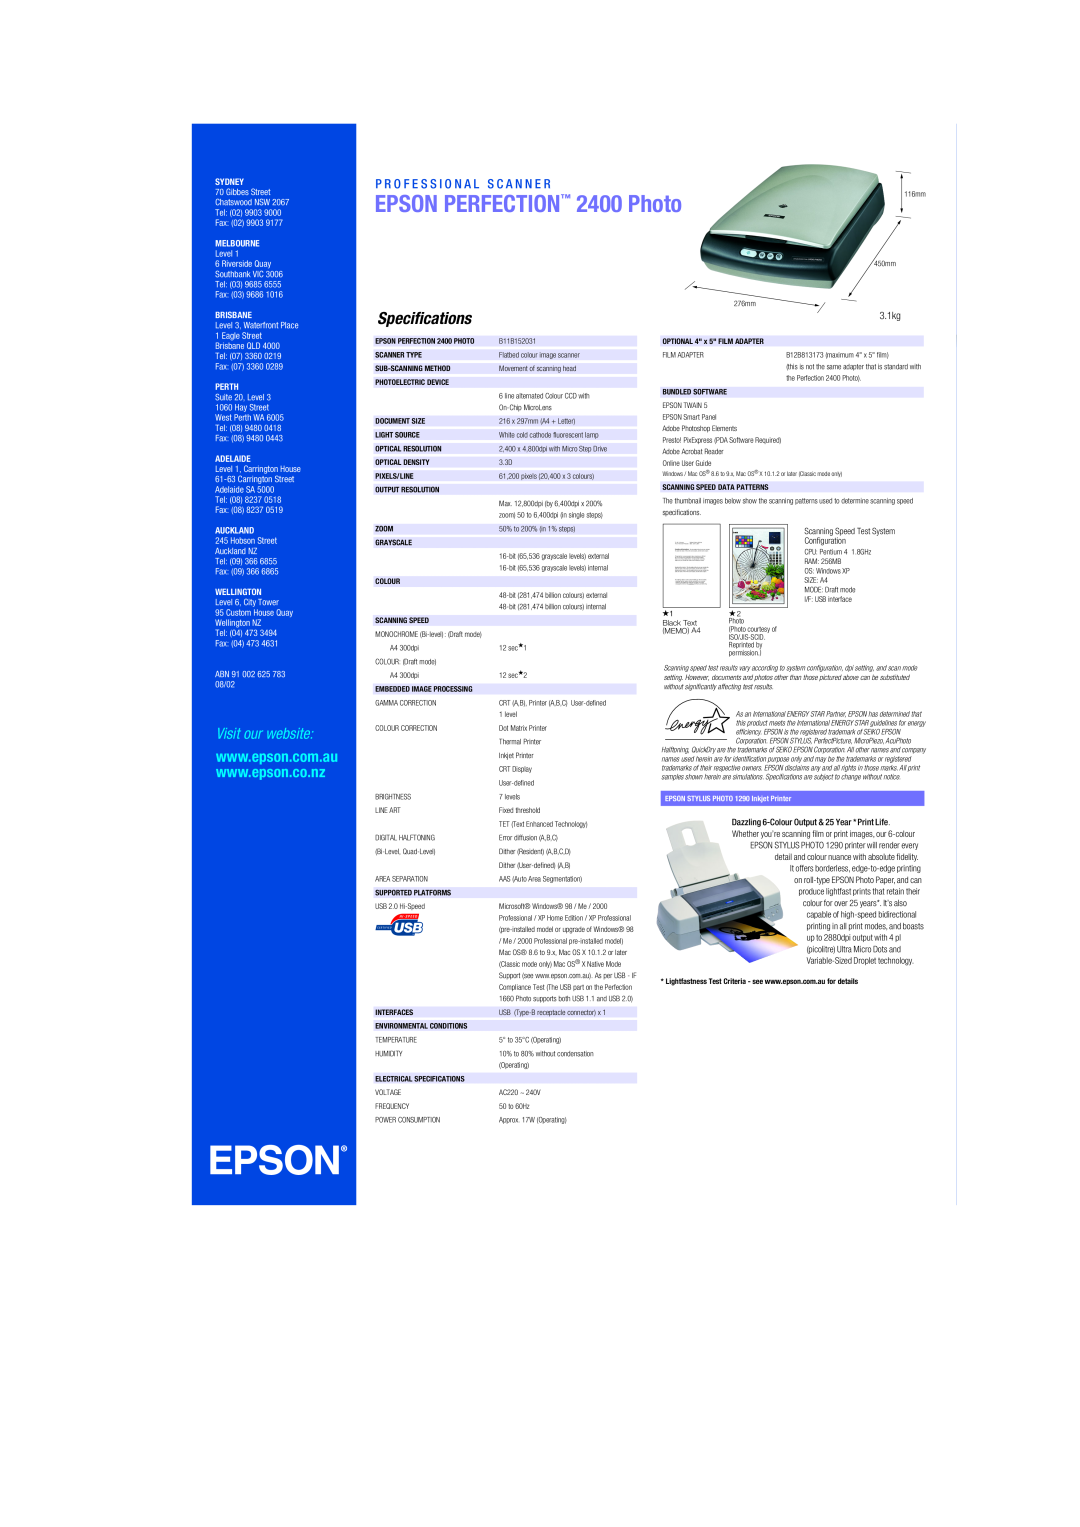 Epson EPSON PERFECTION 2400 Photo, Specifications, Visit our website, P R O F E S S I O N A L S C A N N E R, 3.1kg 